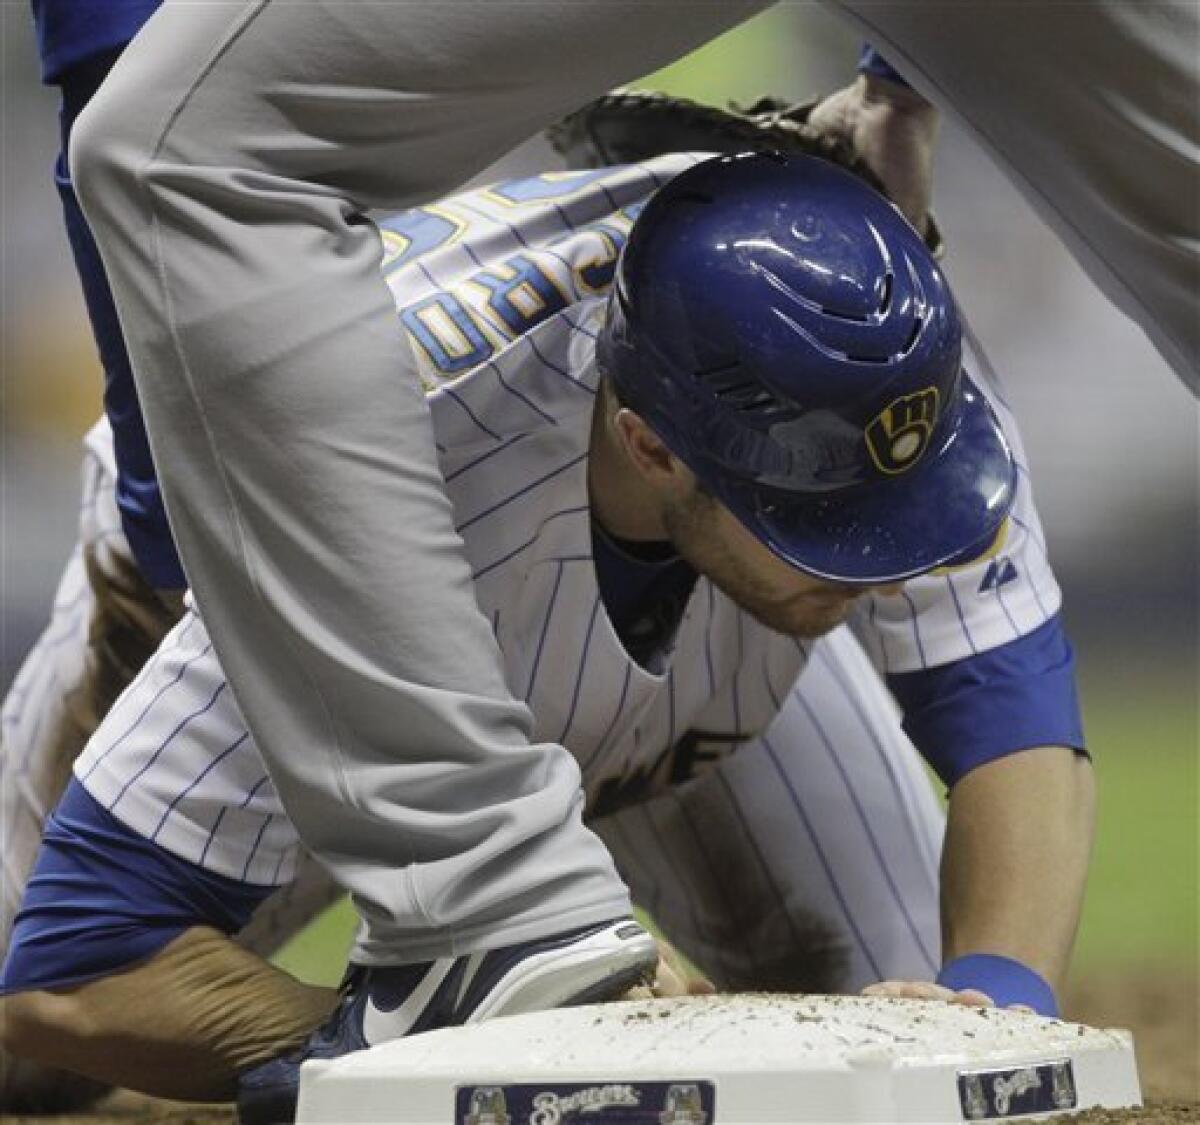 Zambrano dominant again, Cubs beat Brewers 4-0 - The San Diego Union-Tribune